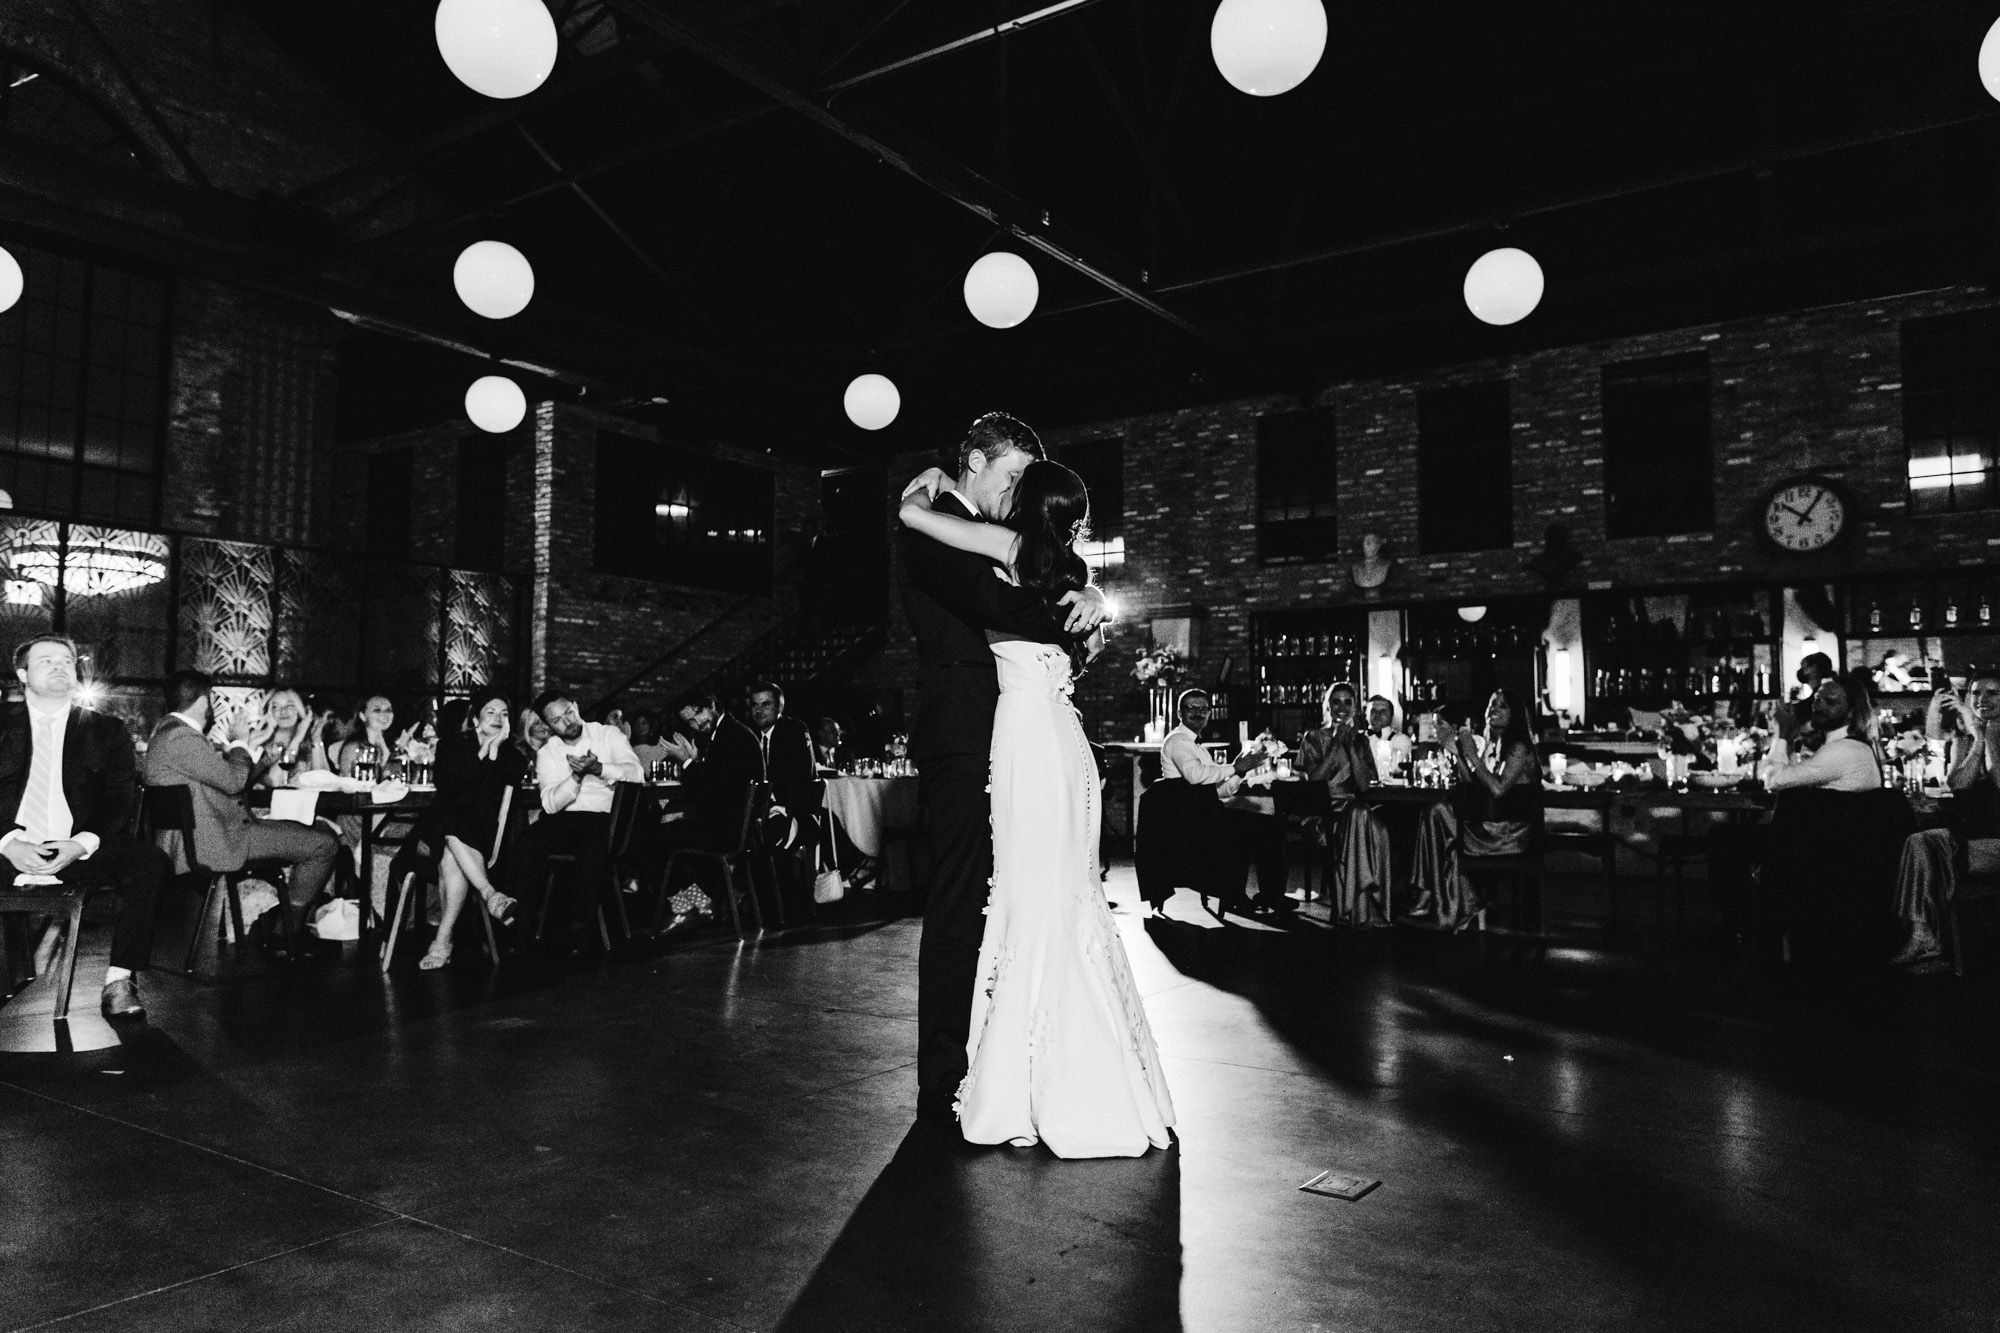 A bride and groom share their first dance at their City Hall wedding in the West Loop of Chicago.